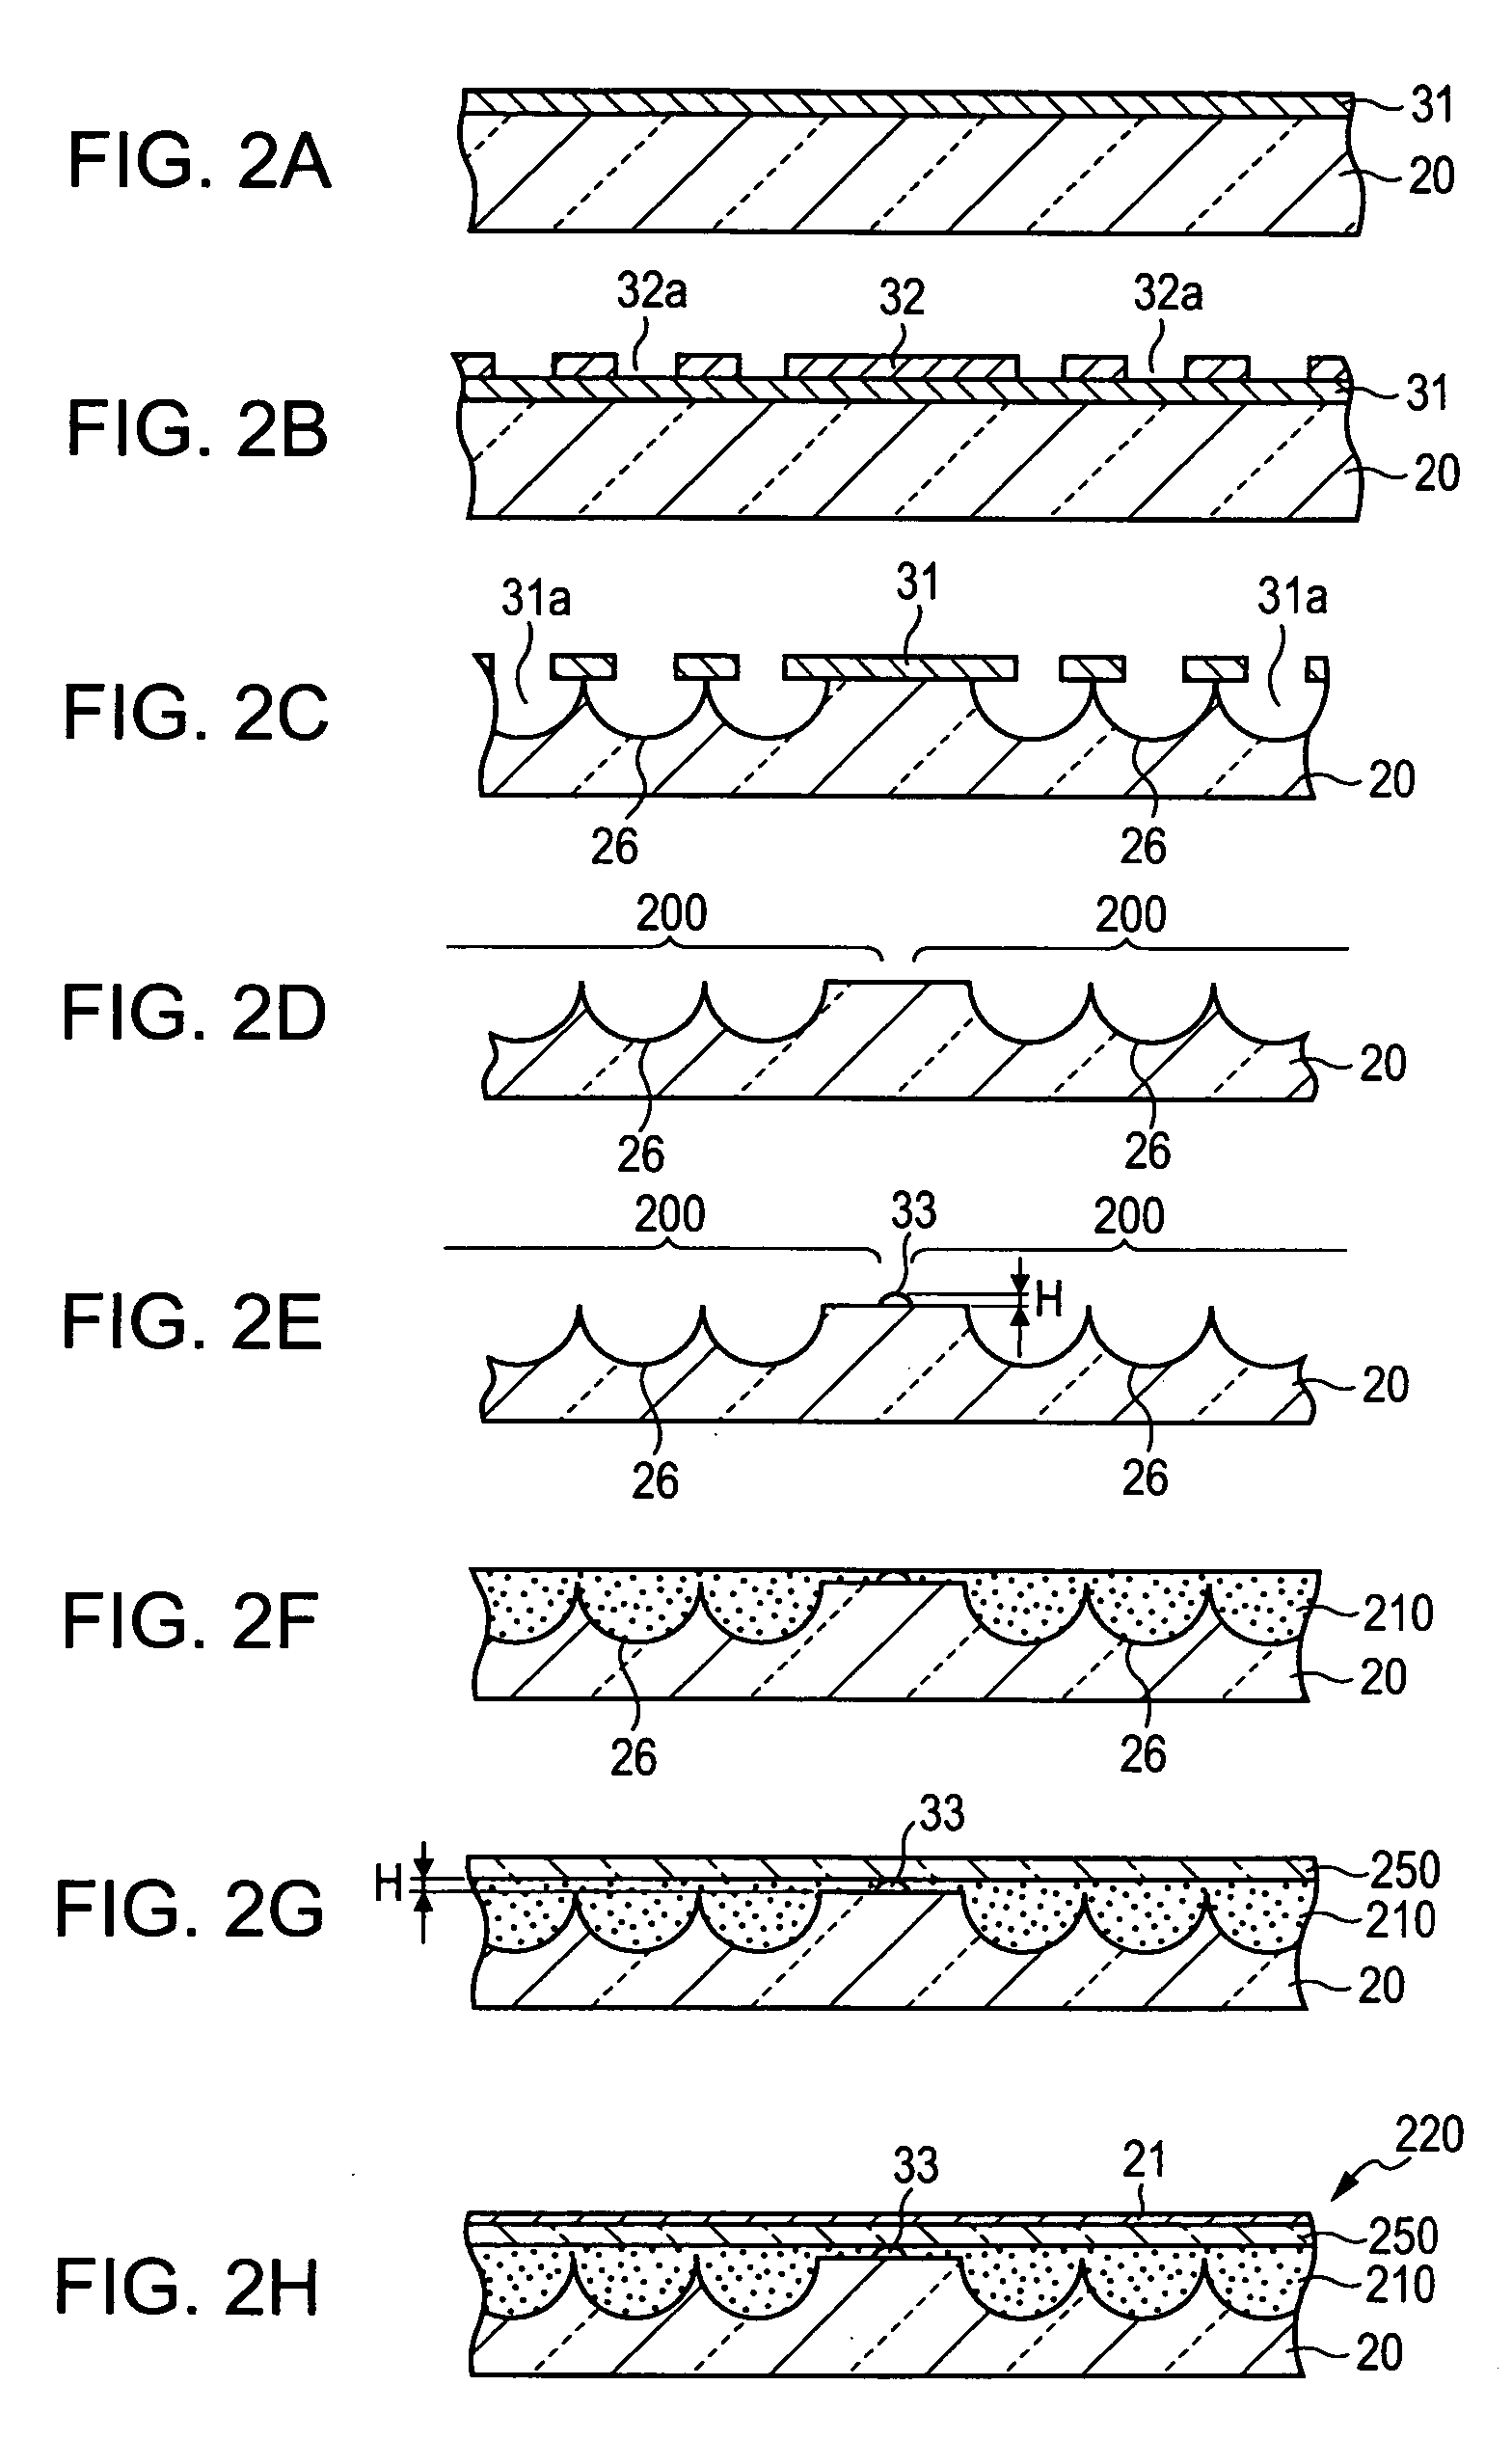 Electro-optical device, method of manufacturing the same, and electronic apparatus using electro-optical device